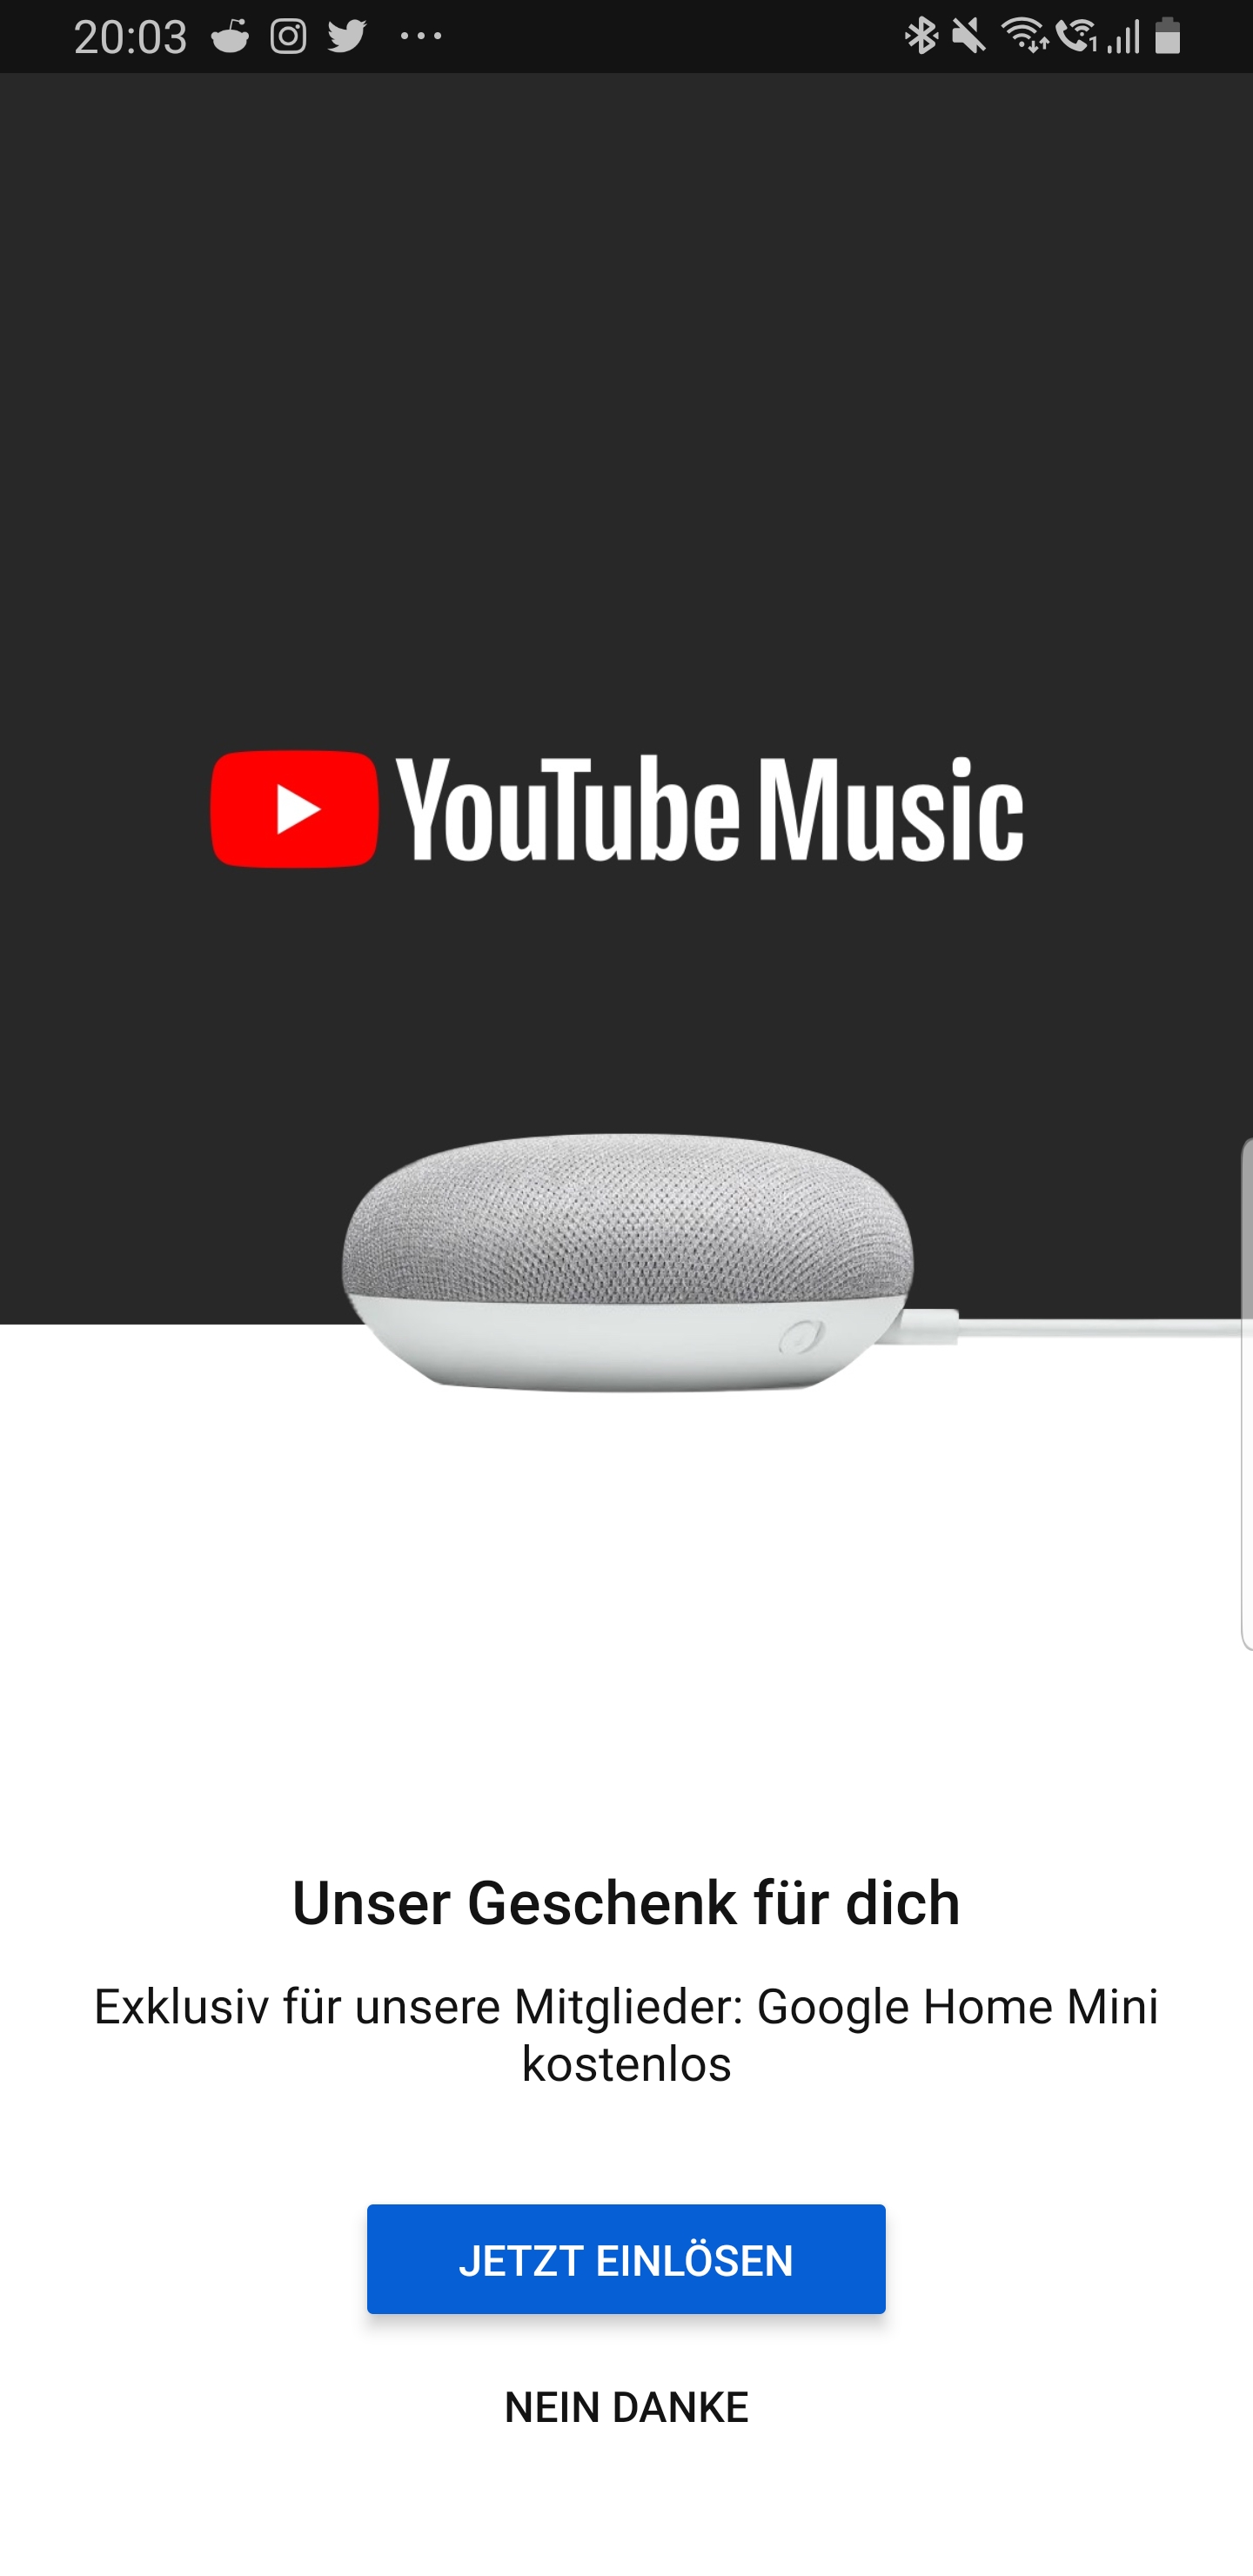 YouTube Music offering some subscribers 